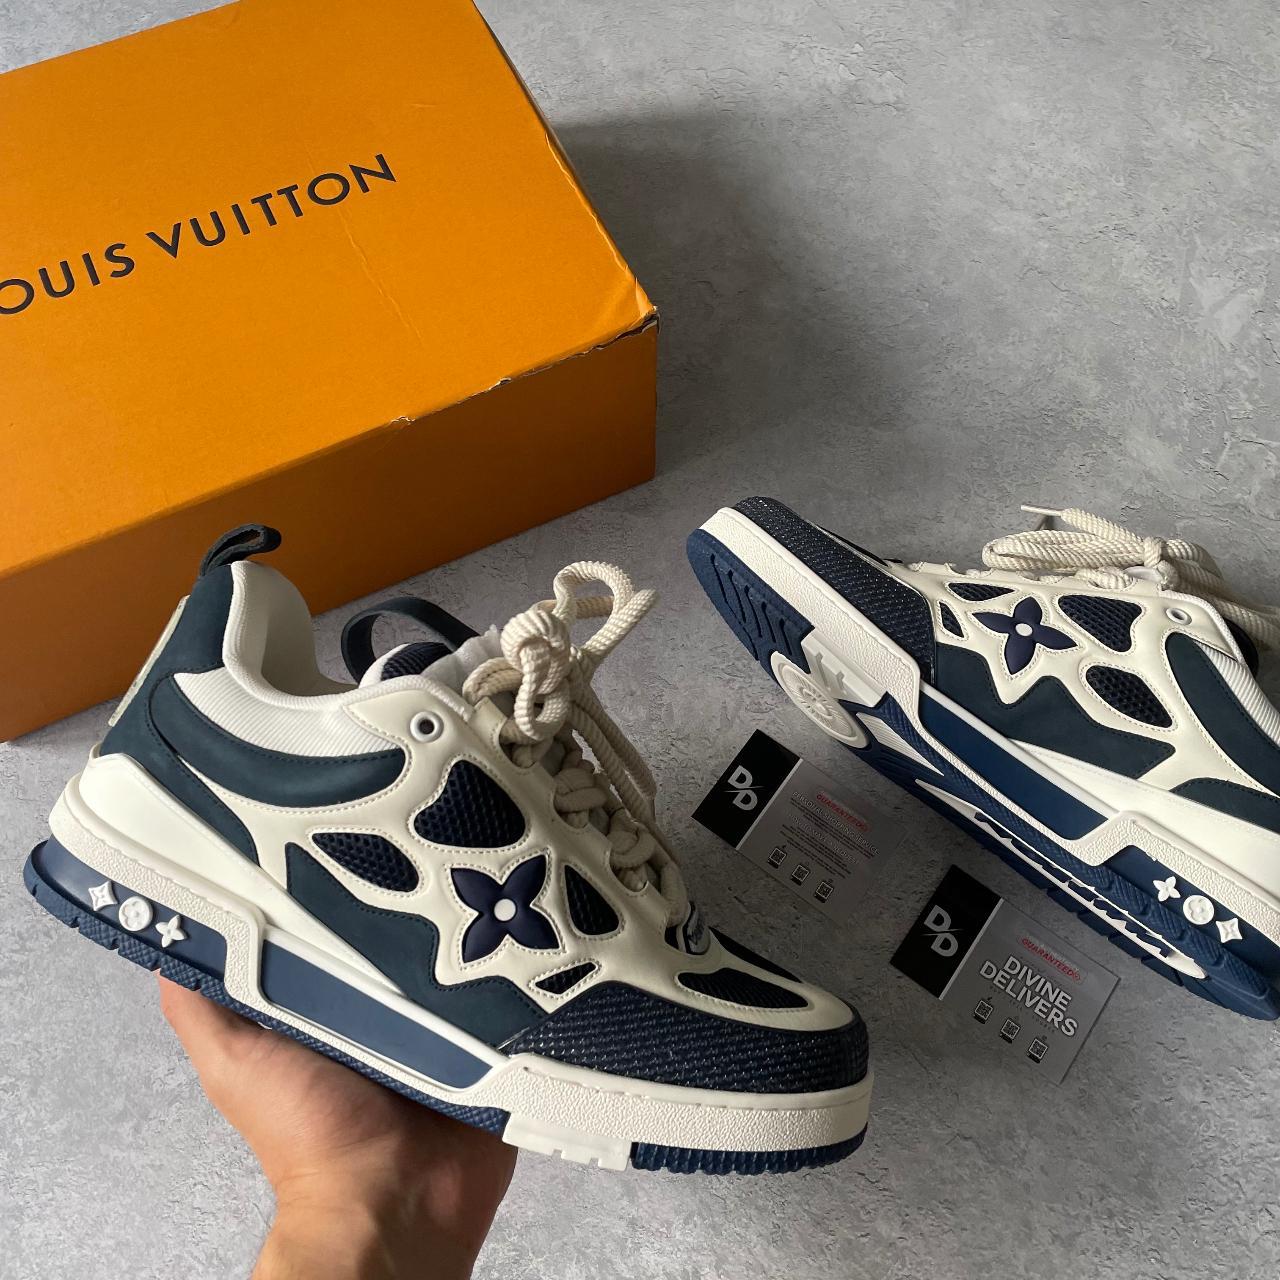 Louis vuitton trainers, size 6 worn a handful of - Depop